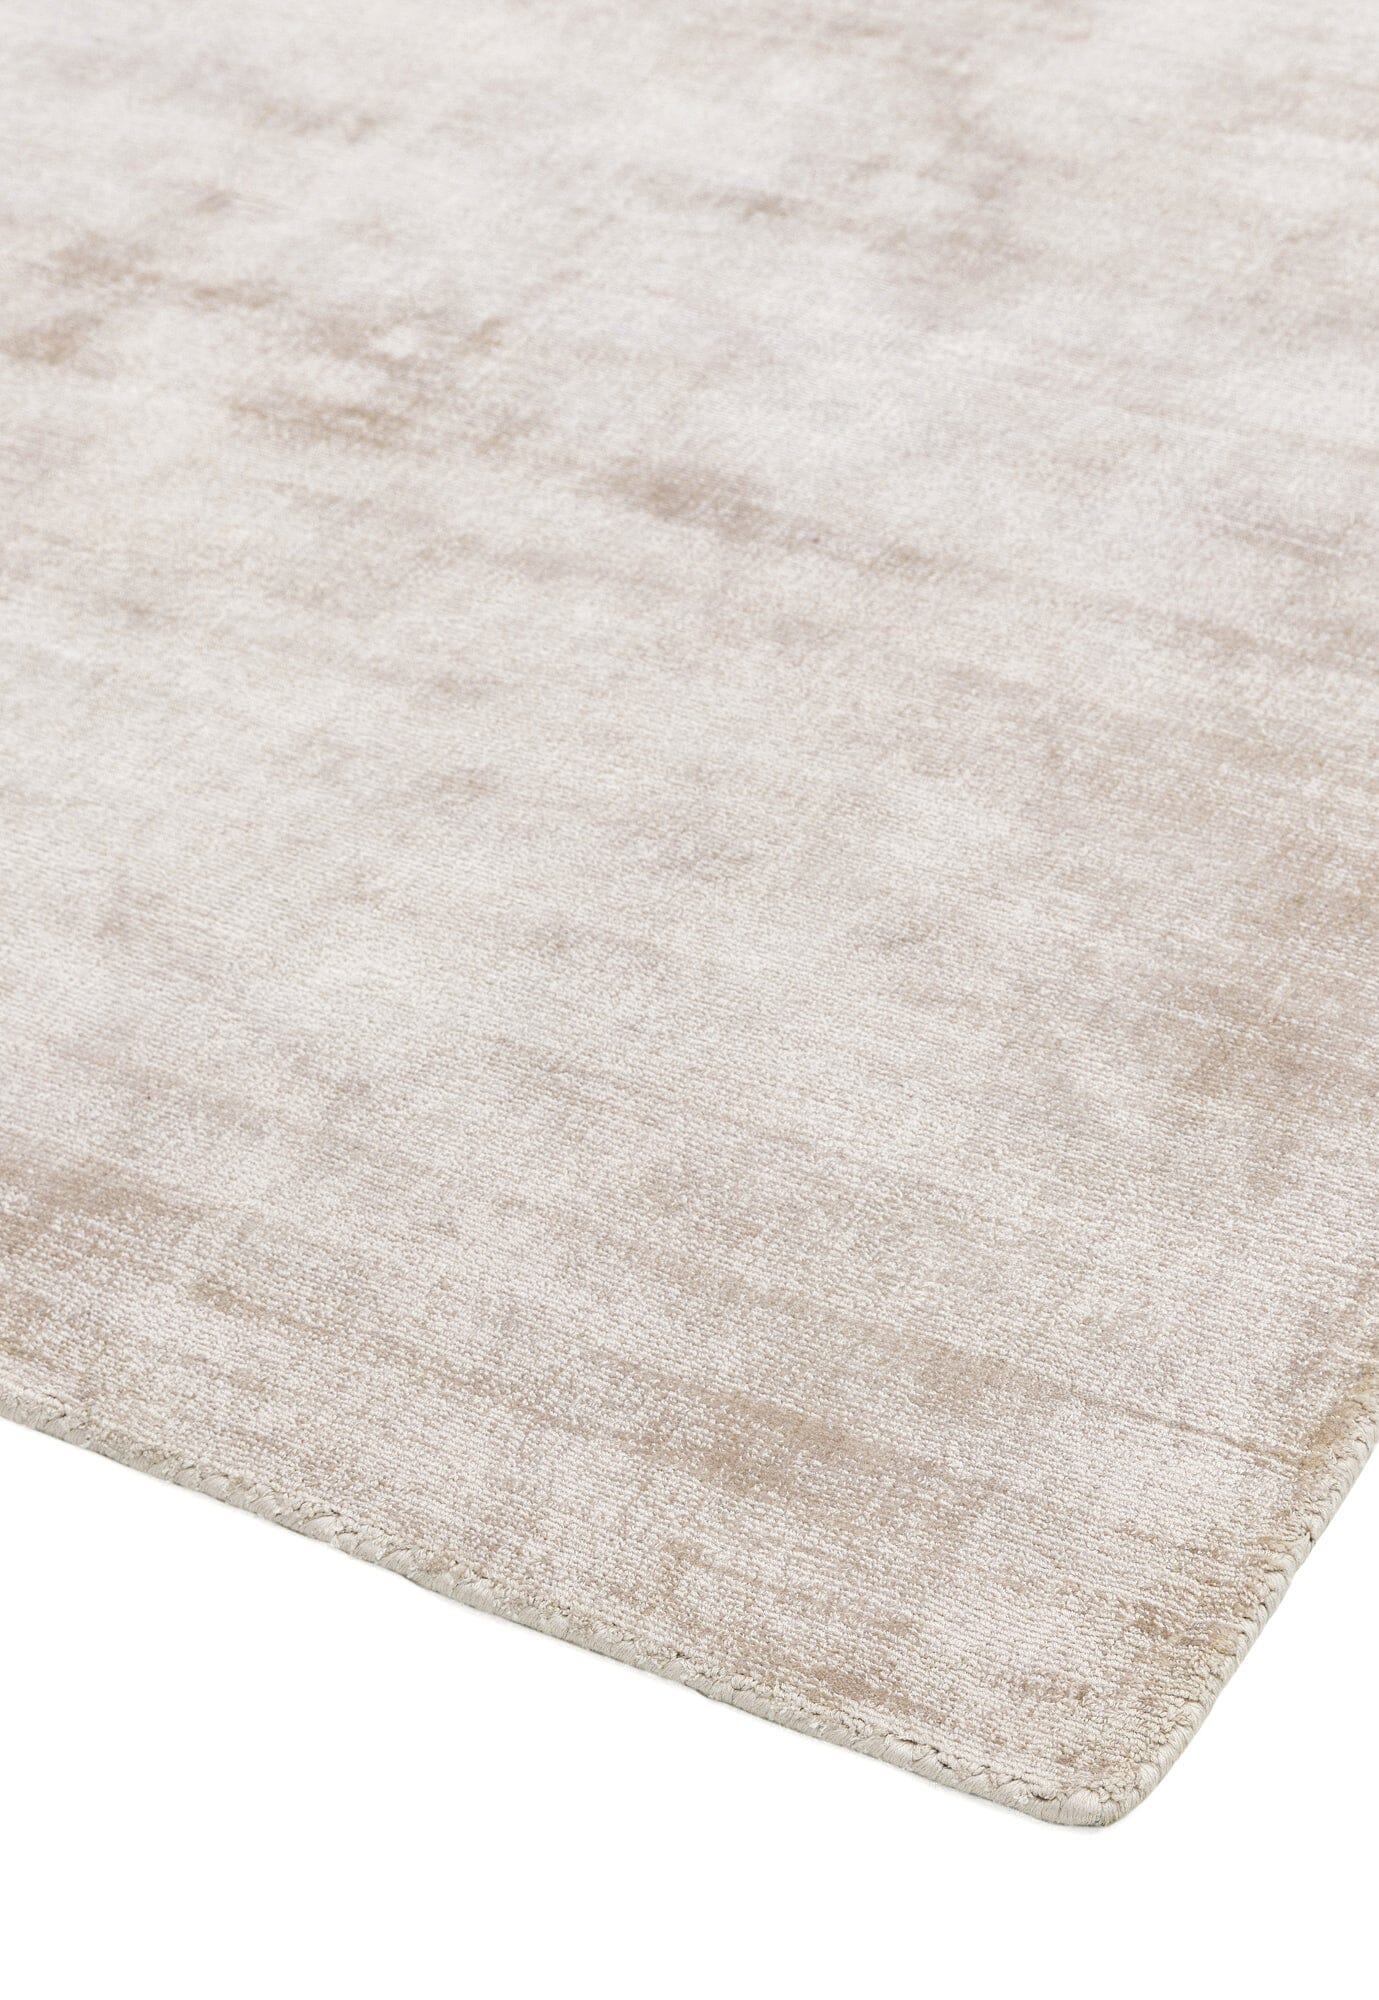  Asiatic Carpets-Asiatic Carpets Blade Hand Woven Rug Putty - 200 x 290cm-Beige, Natural 741 